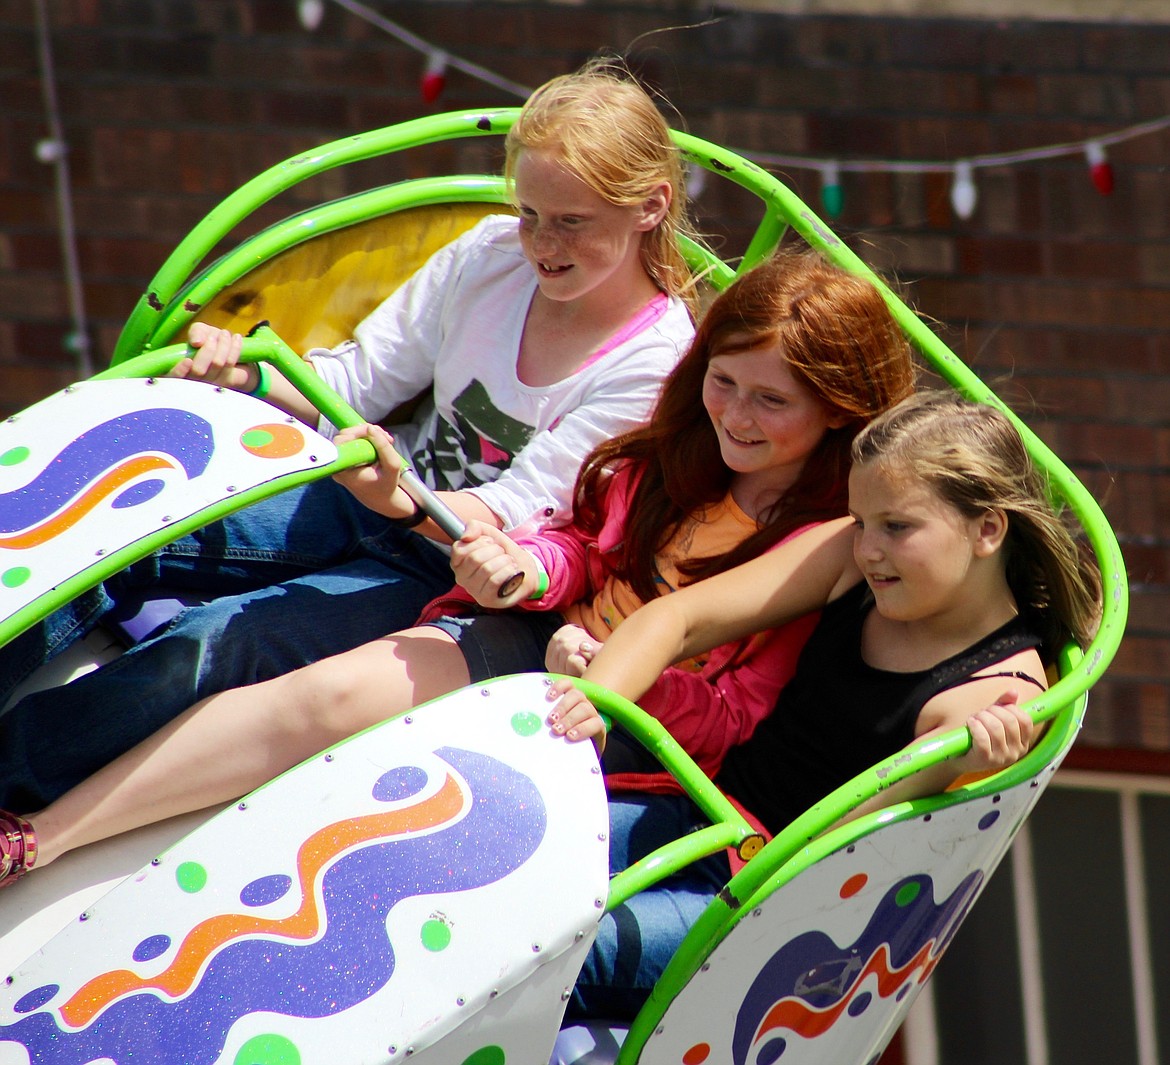 Some younger Gyro Days attendees have a go on the octopus type ride. Looks fun!